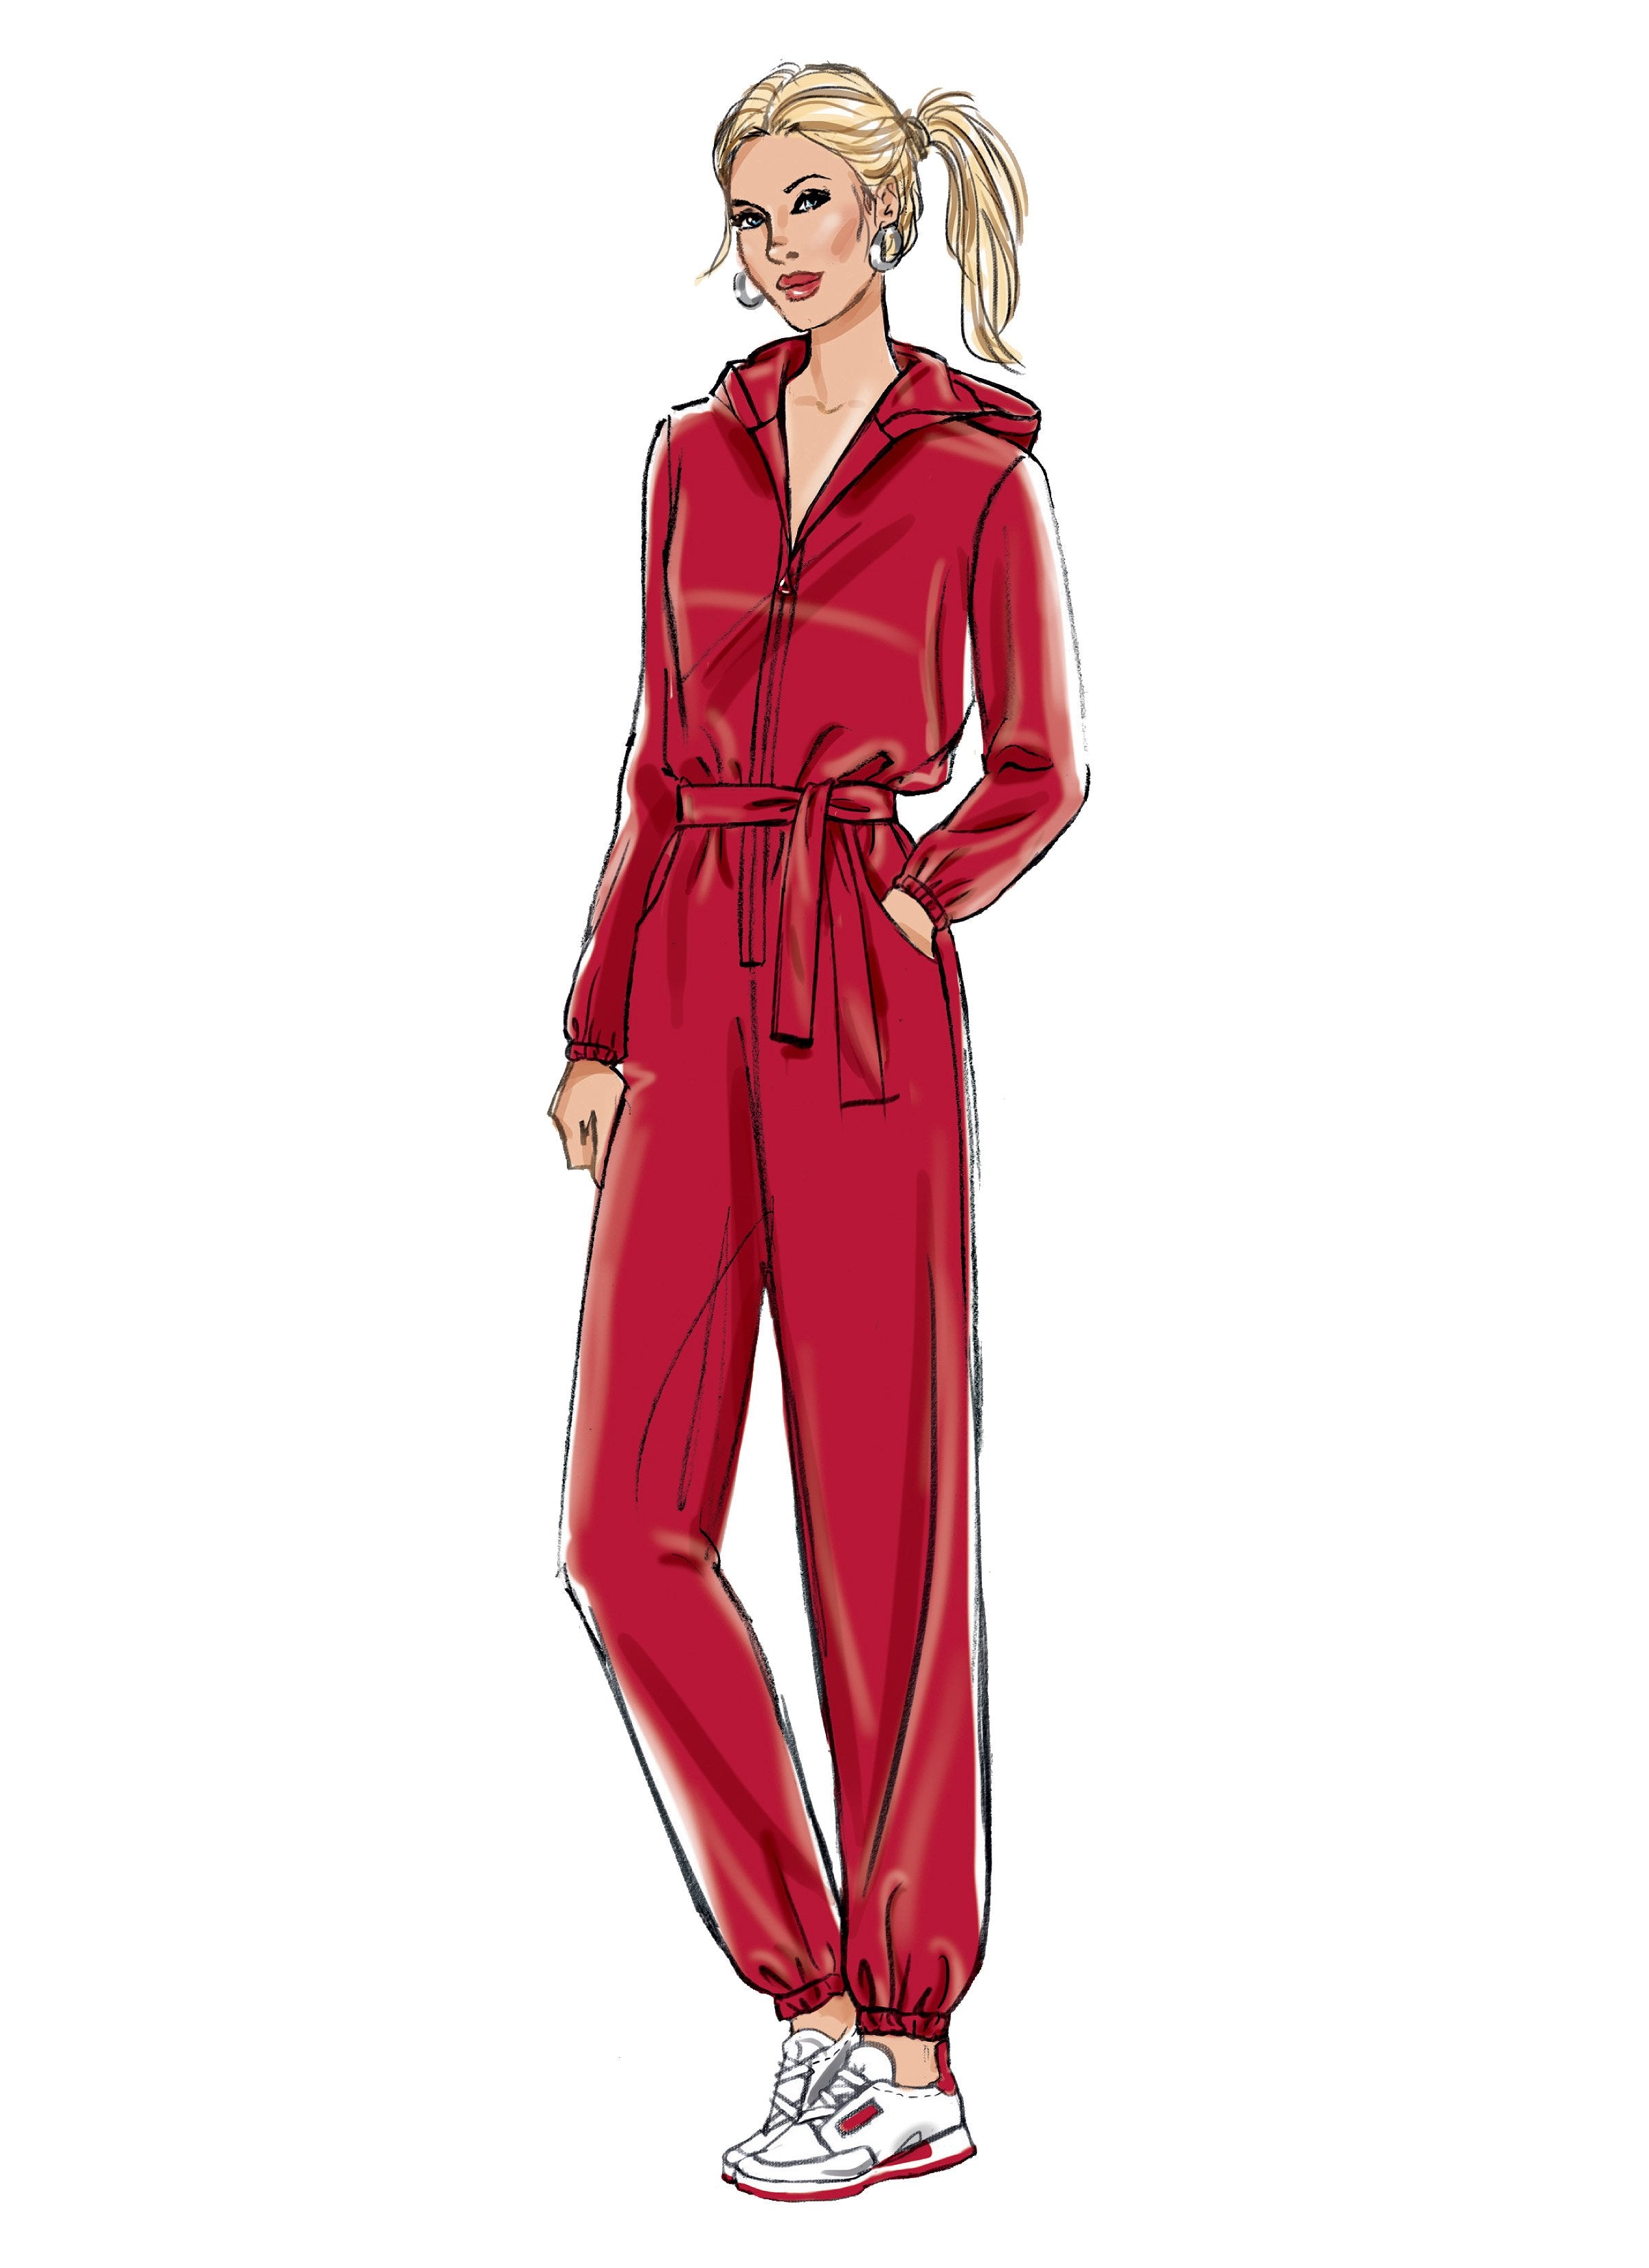 Butterick sewing pattern 6861 Misses' Jumpsuit, Sash and Belt from Jaycotts Sewing Supplies